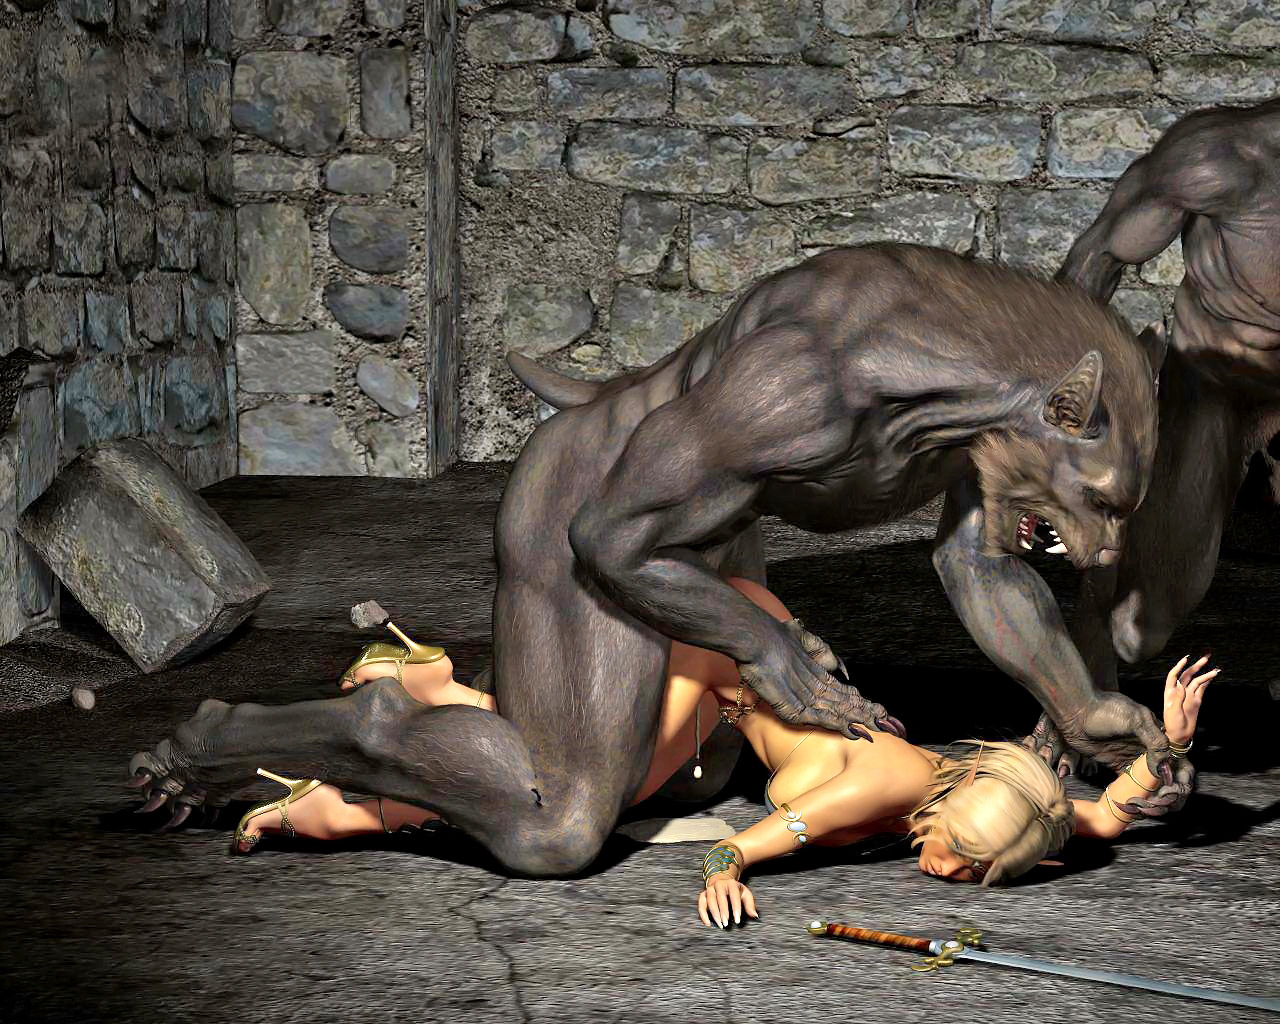 Buttfucking Anal Sex - Brutally buttfucked by werewolves â€“ 3D RPG animation anal sex at  Hd3dMonsterSex.com